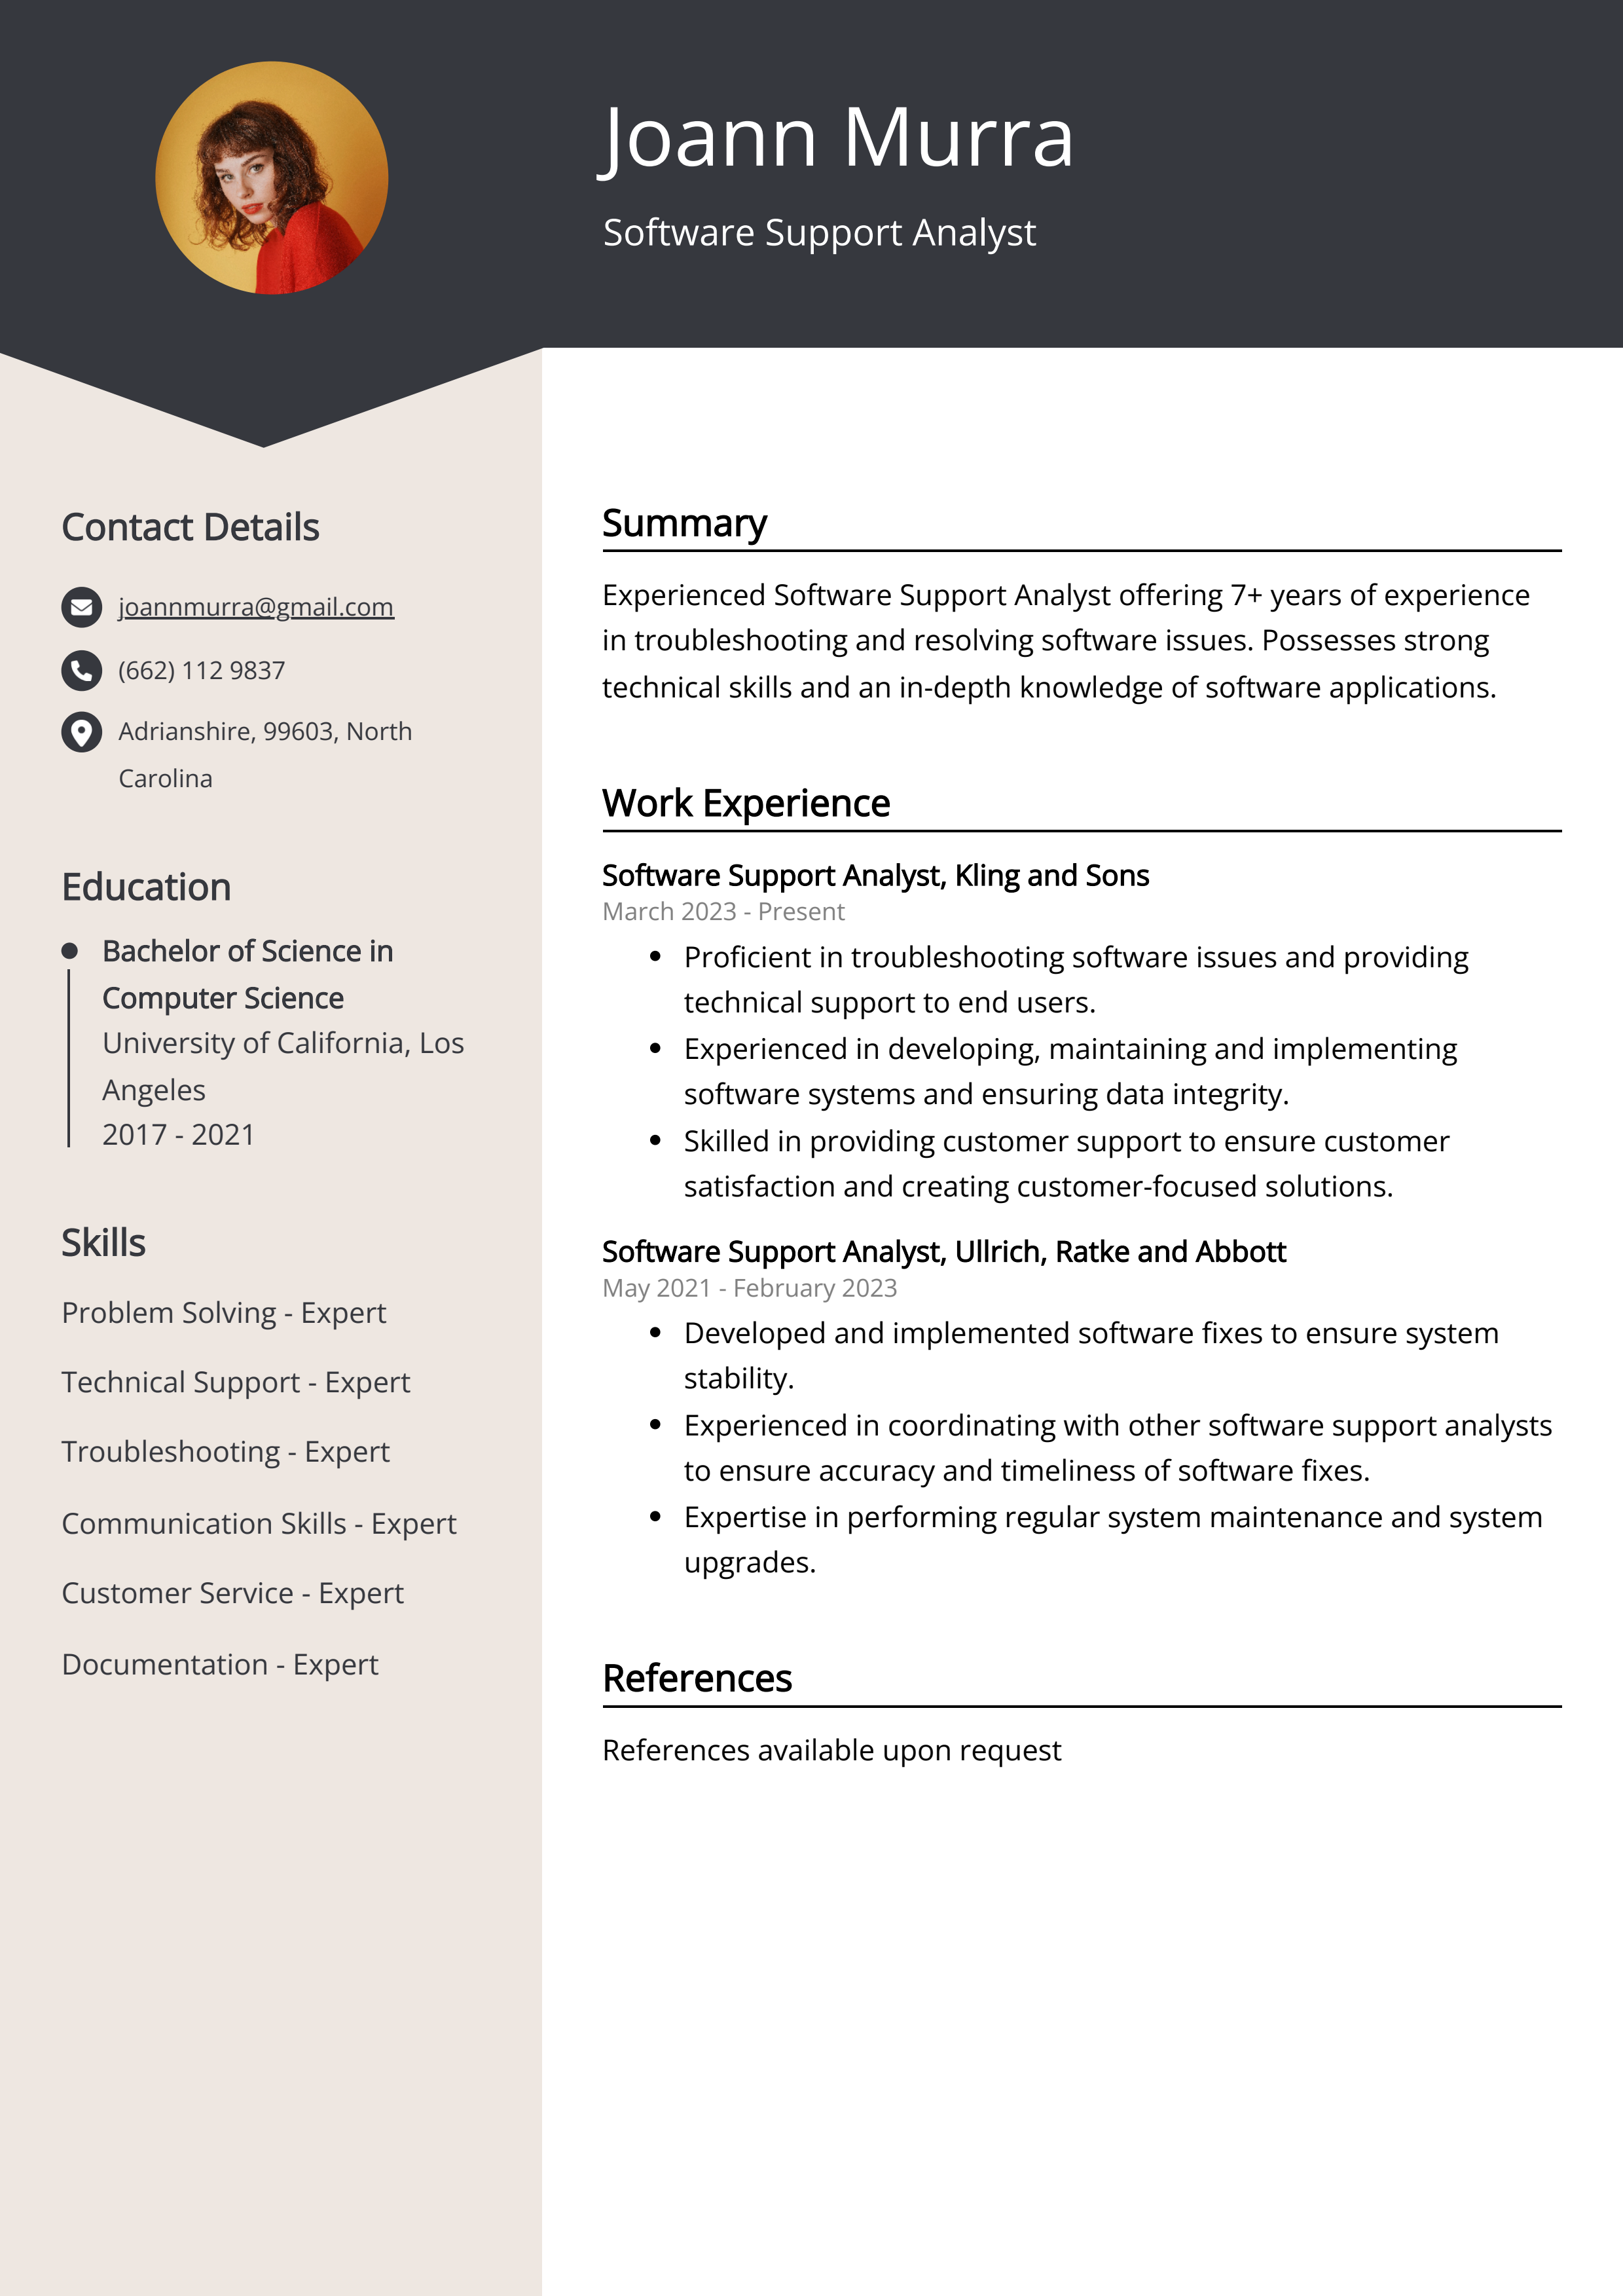 Software Support Analyst CV Example